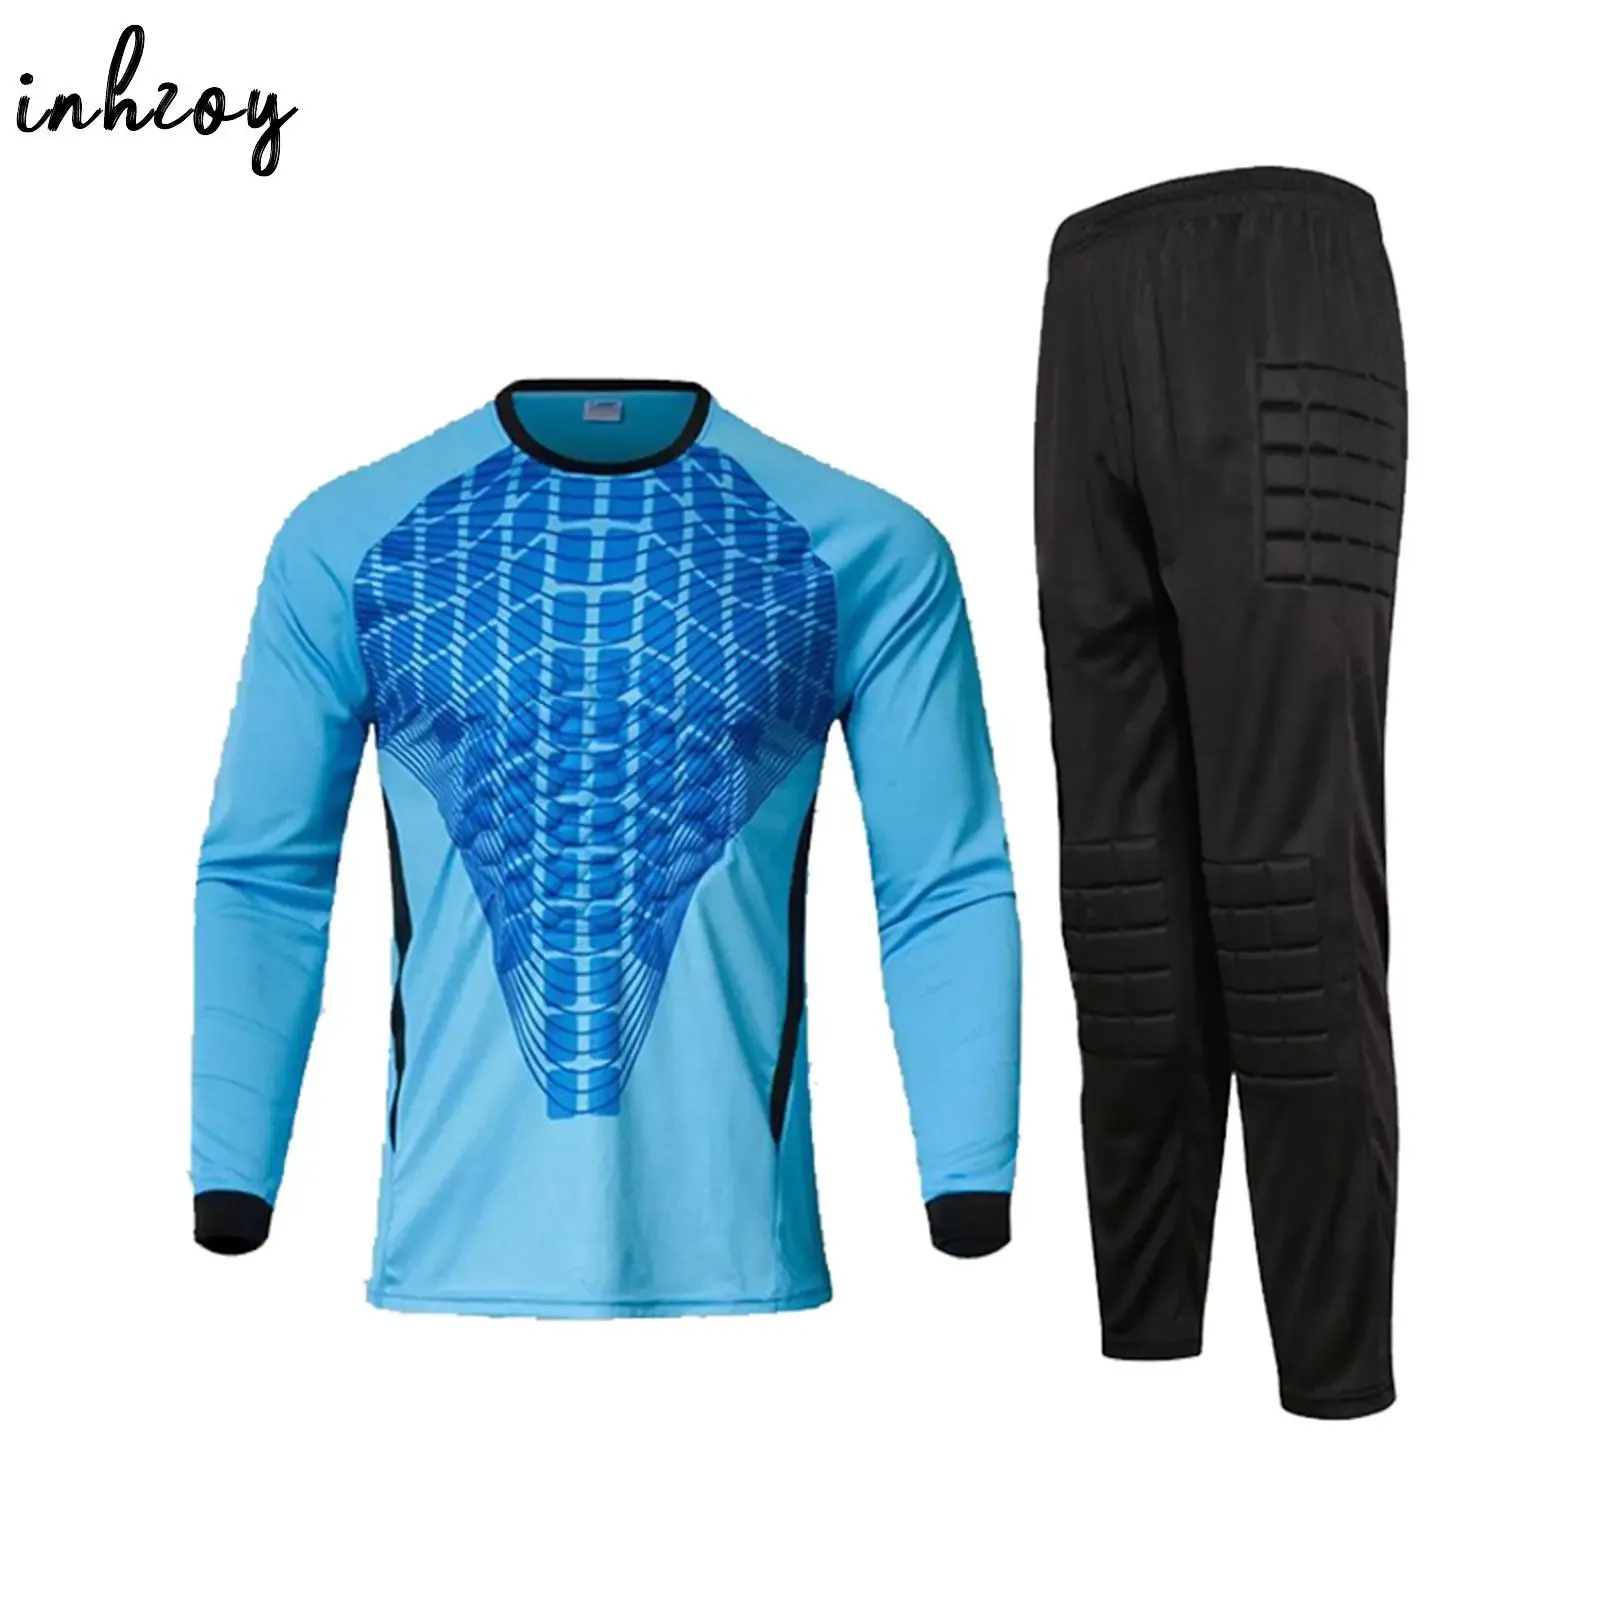 Other Sporting Goods Goalkeeper Jersey Set for Men Football Training Tracksuit Soccer Uniform Long Sleeve Padded Goalie Shirt Top with Sweatpants 231011